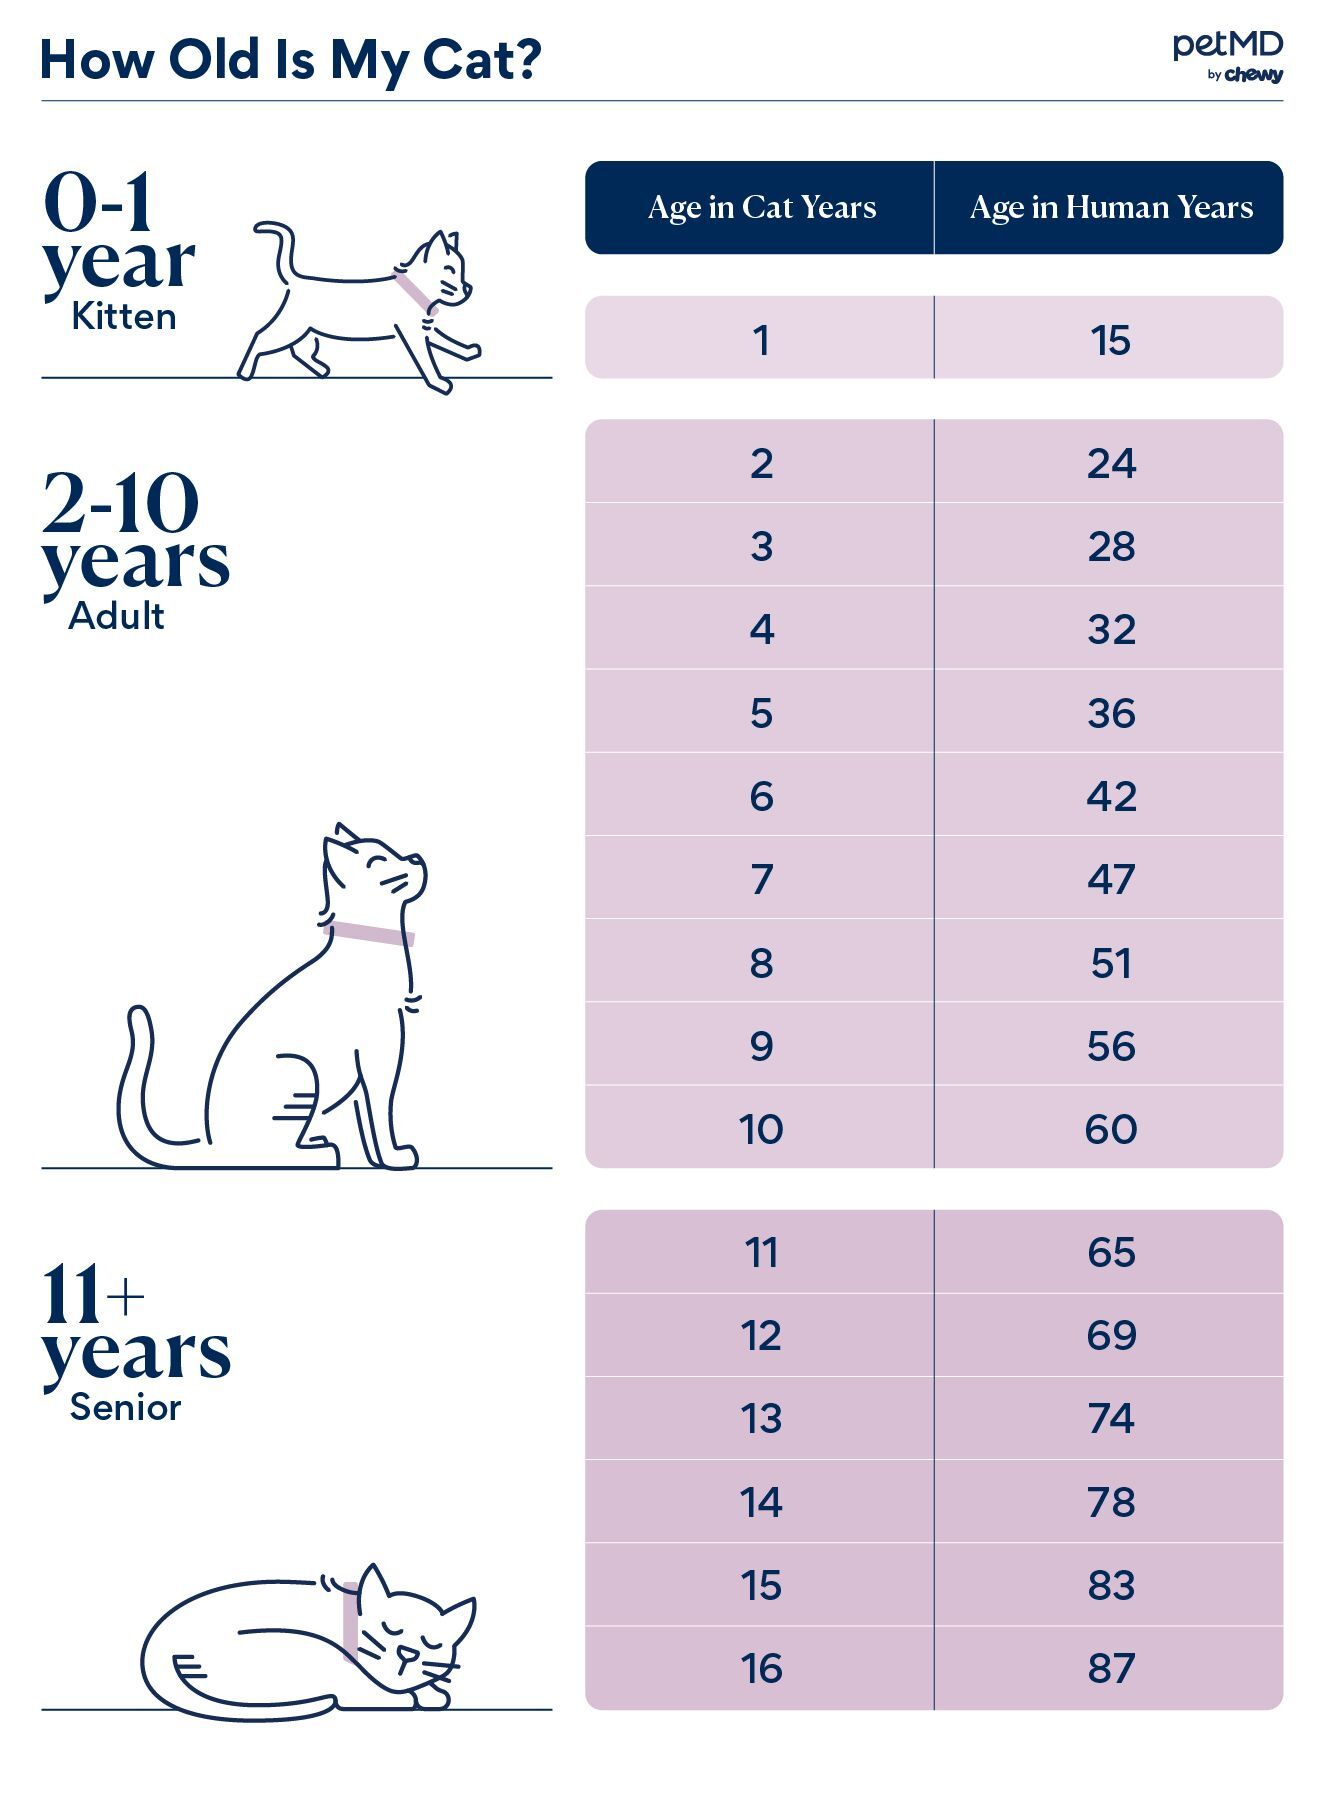 A infographic chart detailing the age conversion of a cat's age to human years.